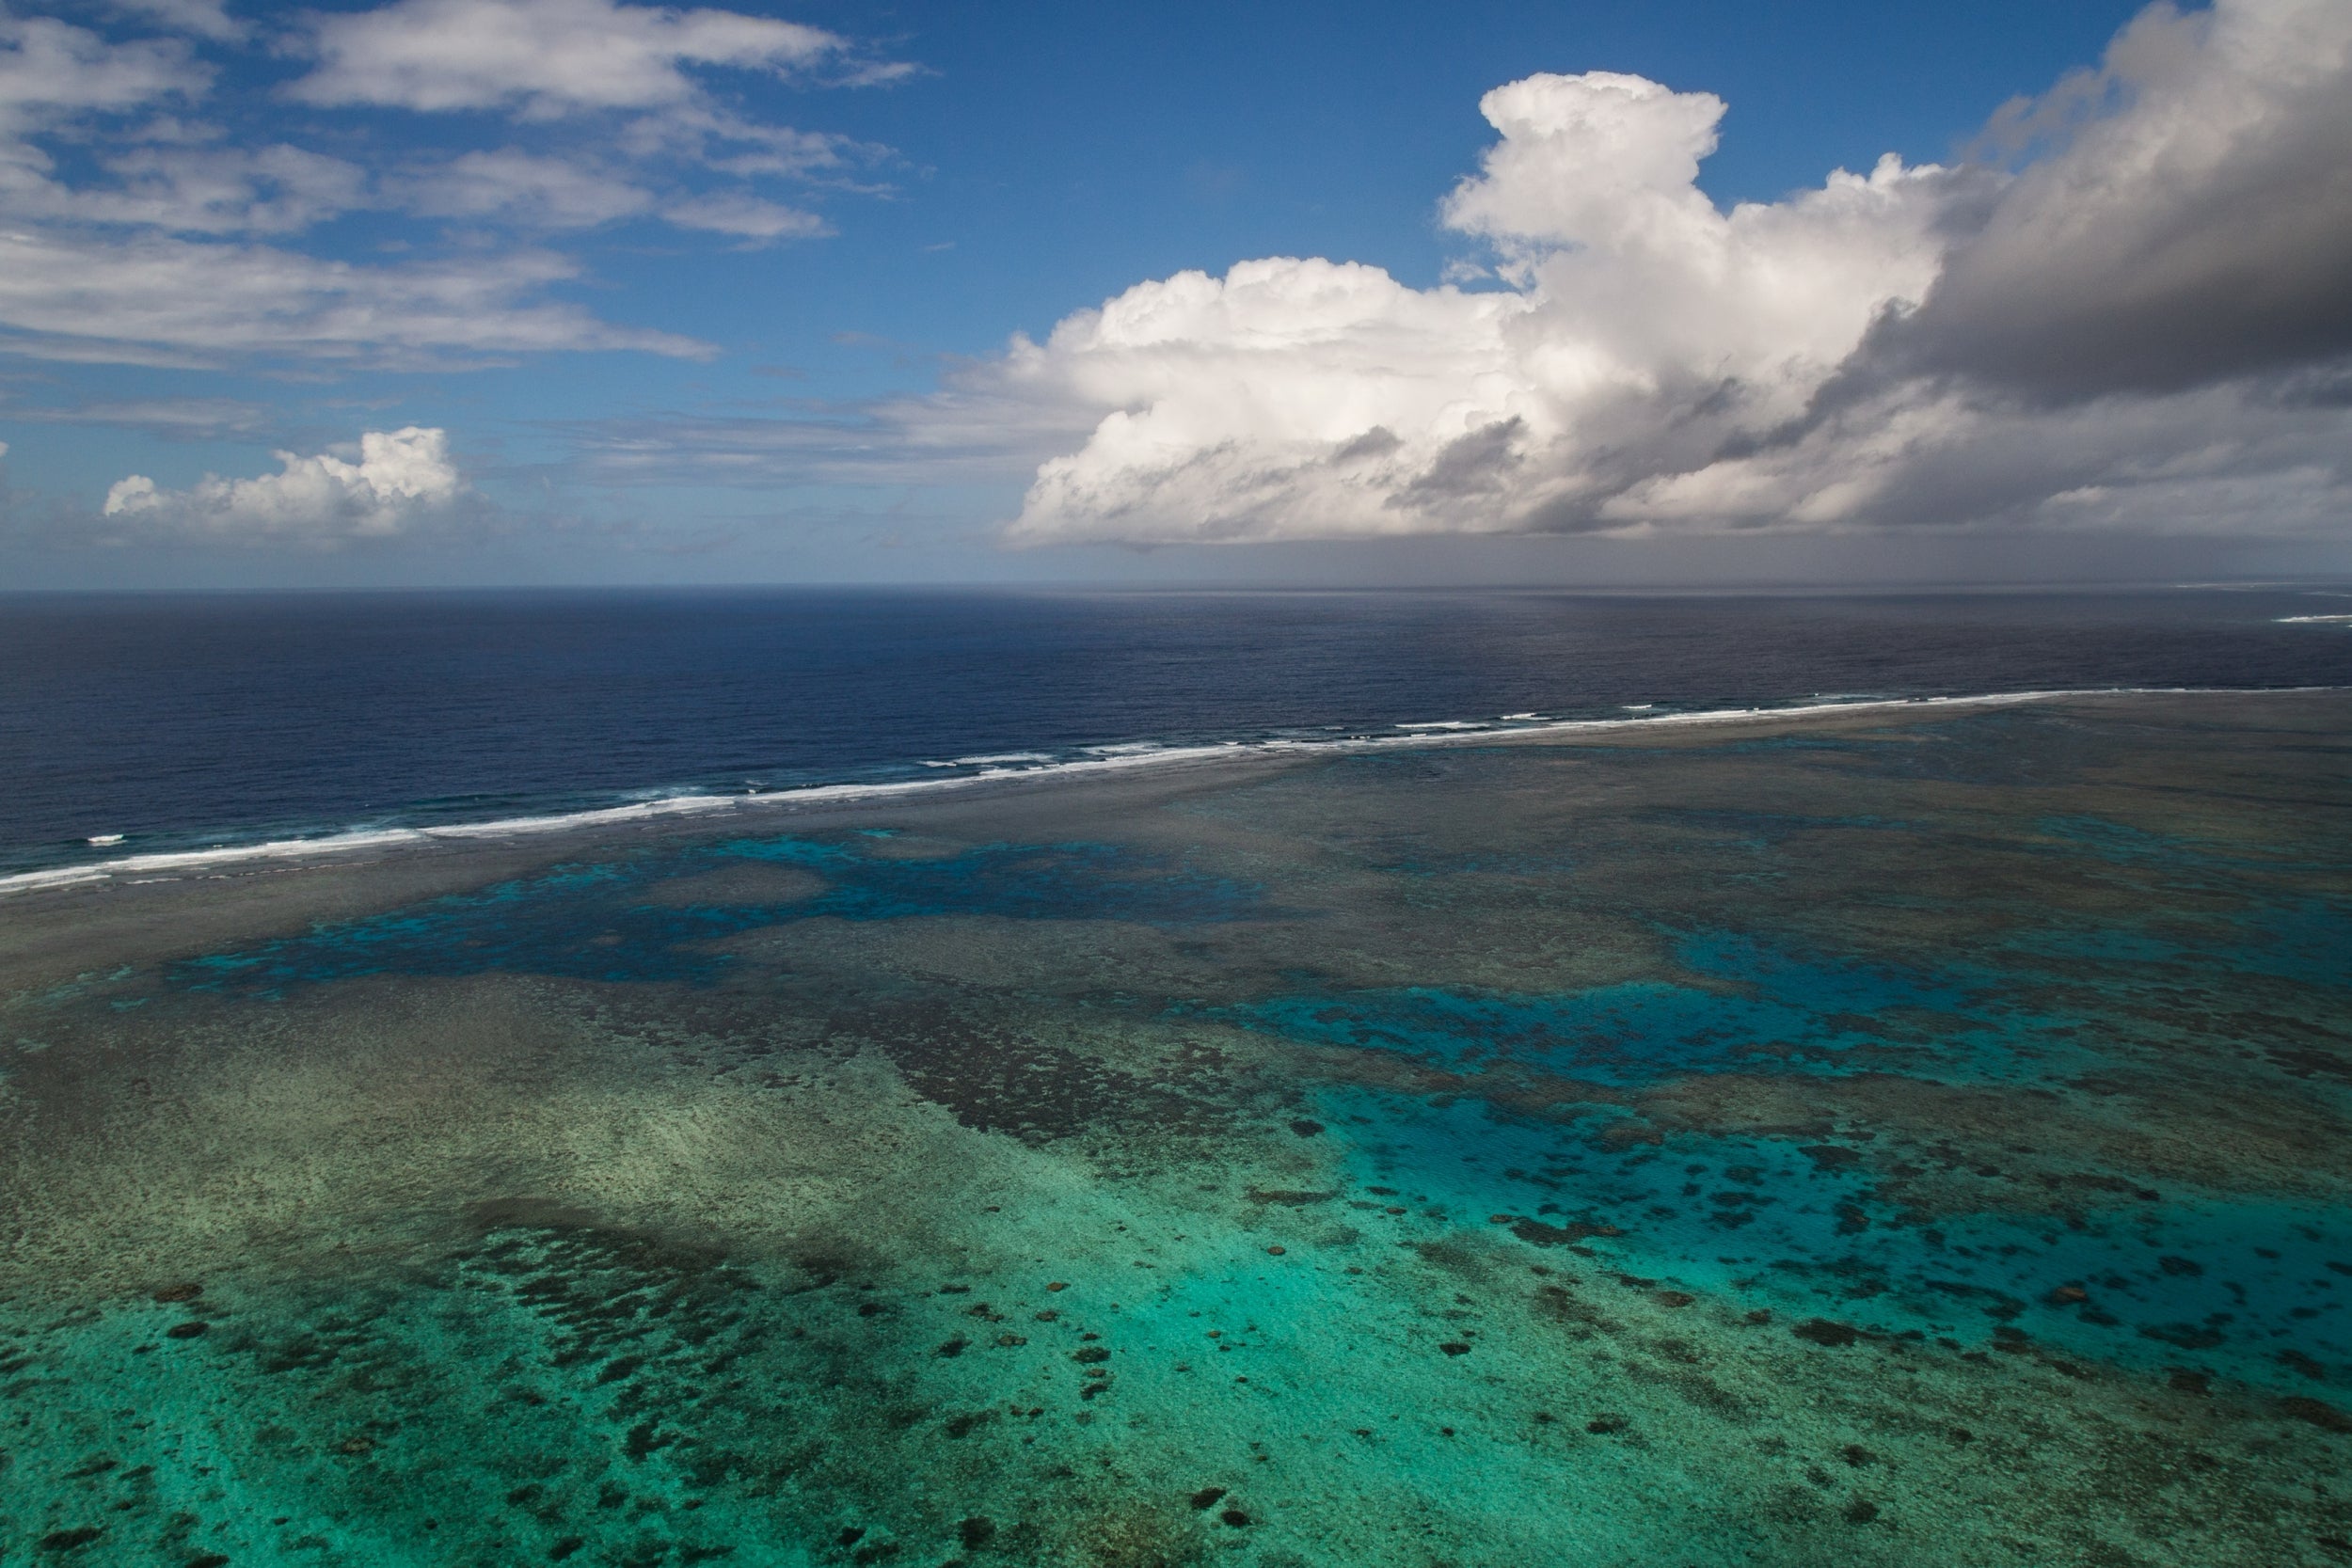 The Great Barrier Reef has suffered from a lack of tourists